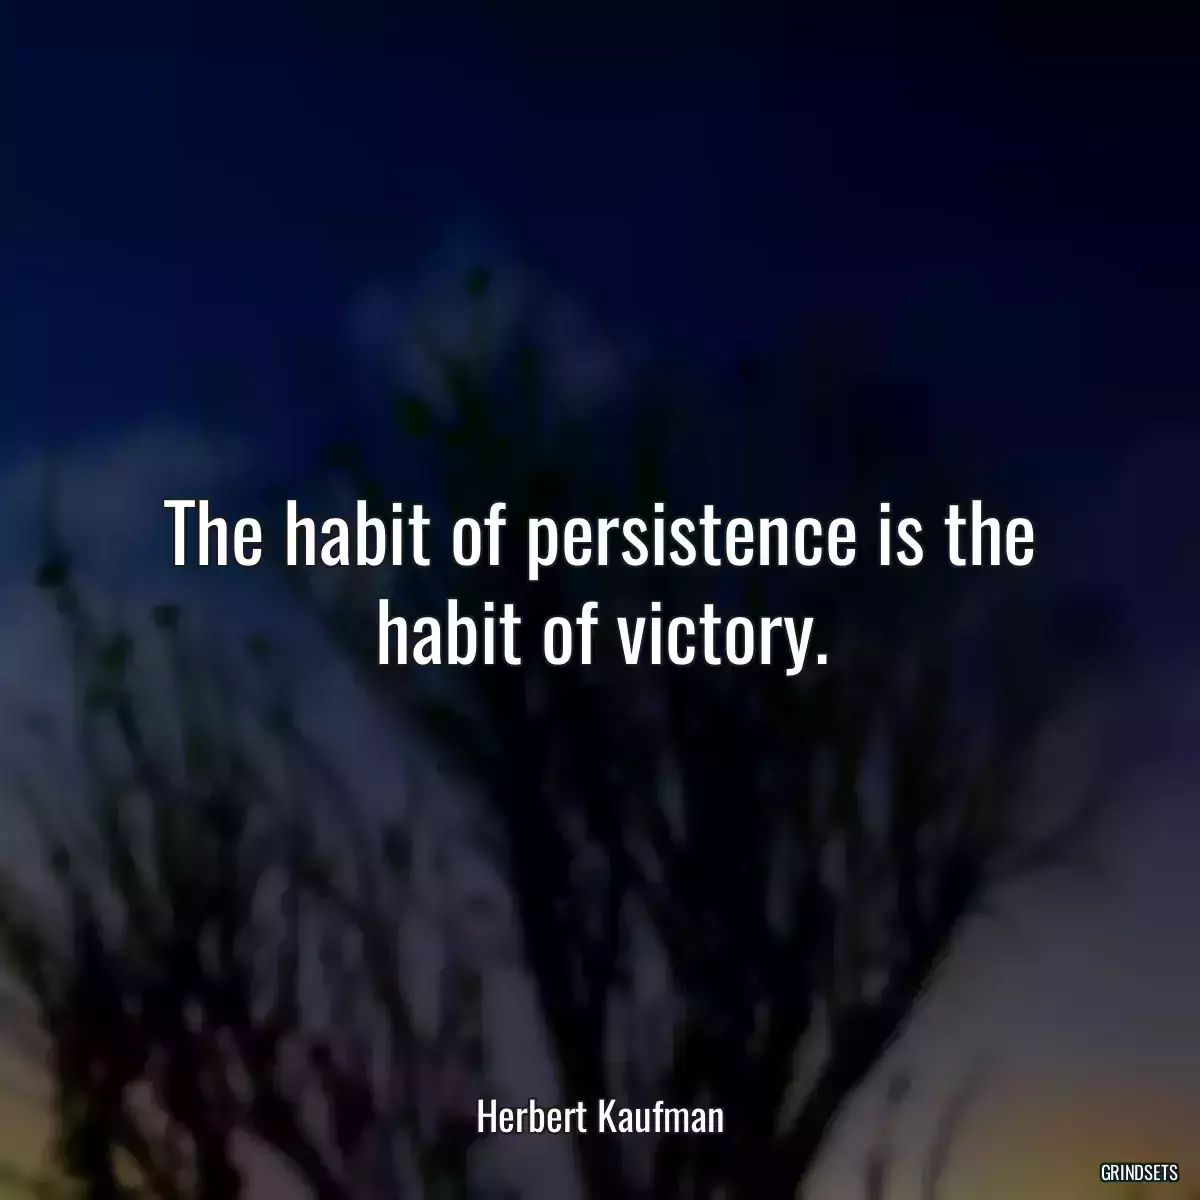 The habit of persistence is the habit of victory.